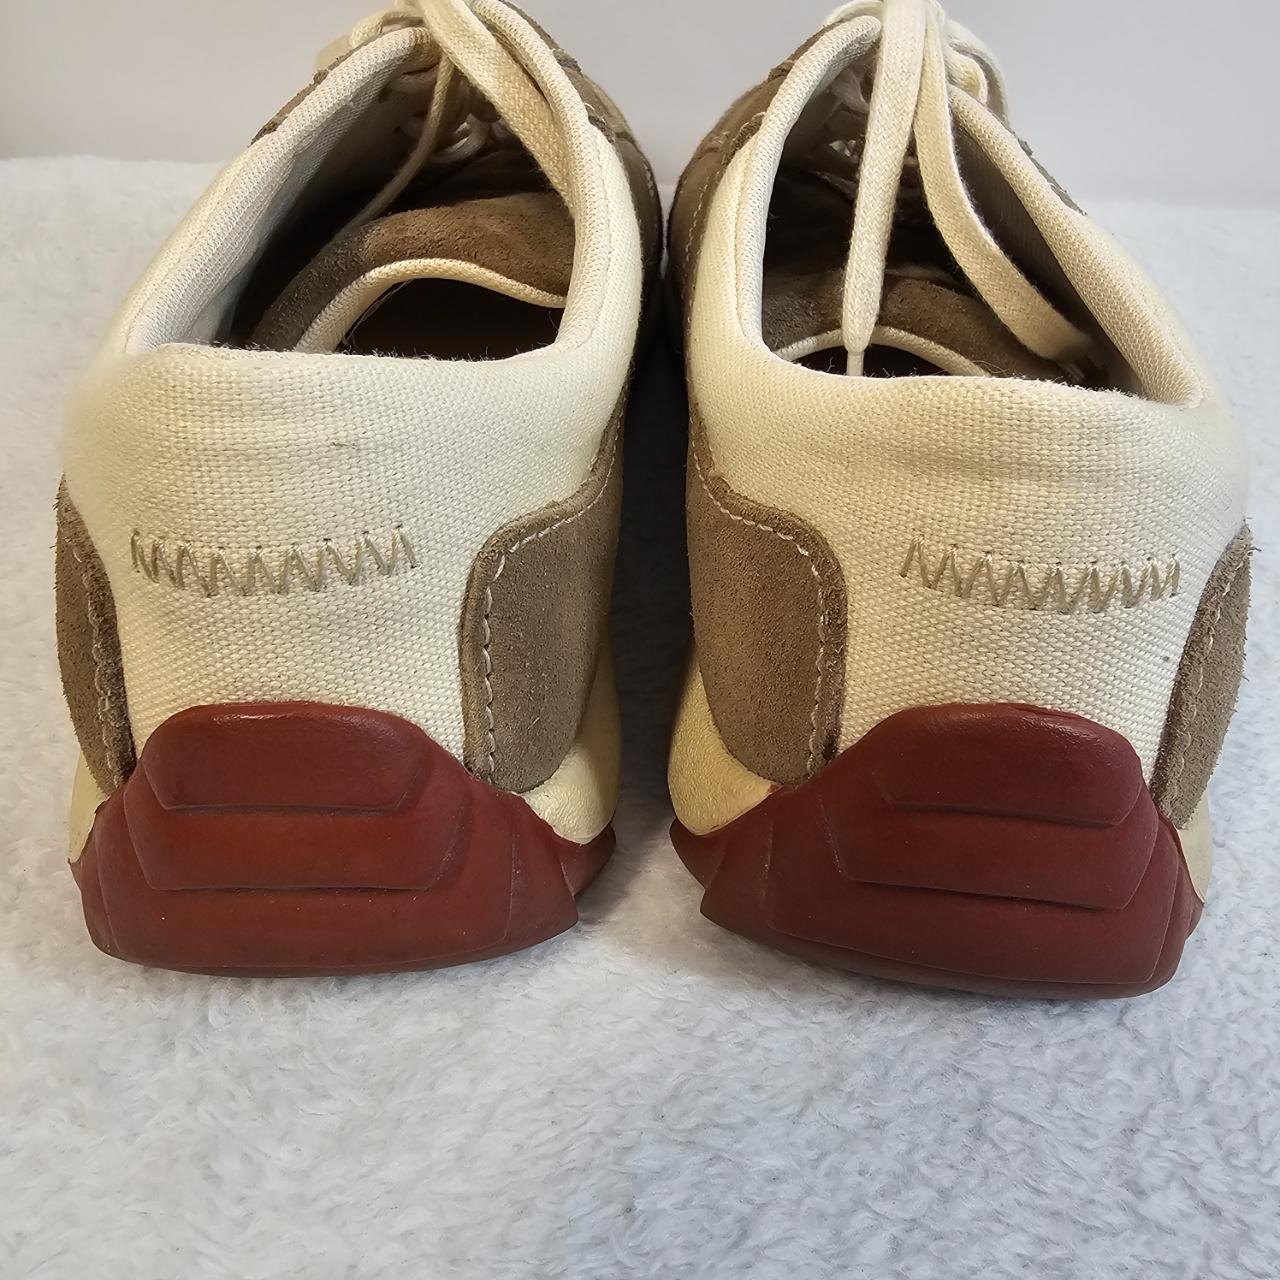 Simple Suede Taupe Sneaker Shoes Size 7.5 Pre-loved... - Depop